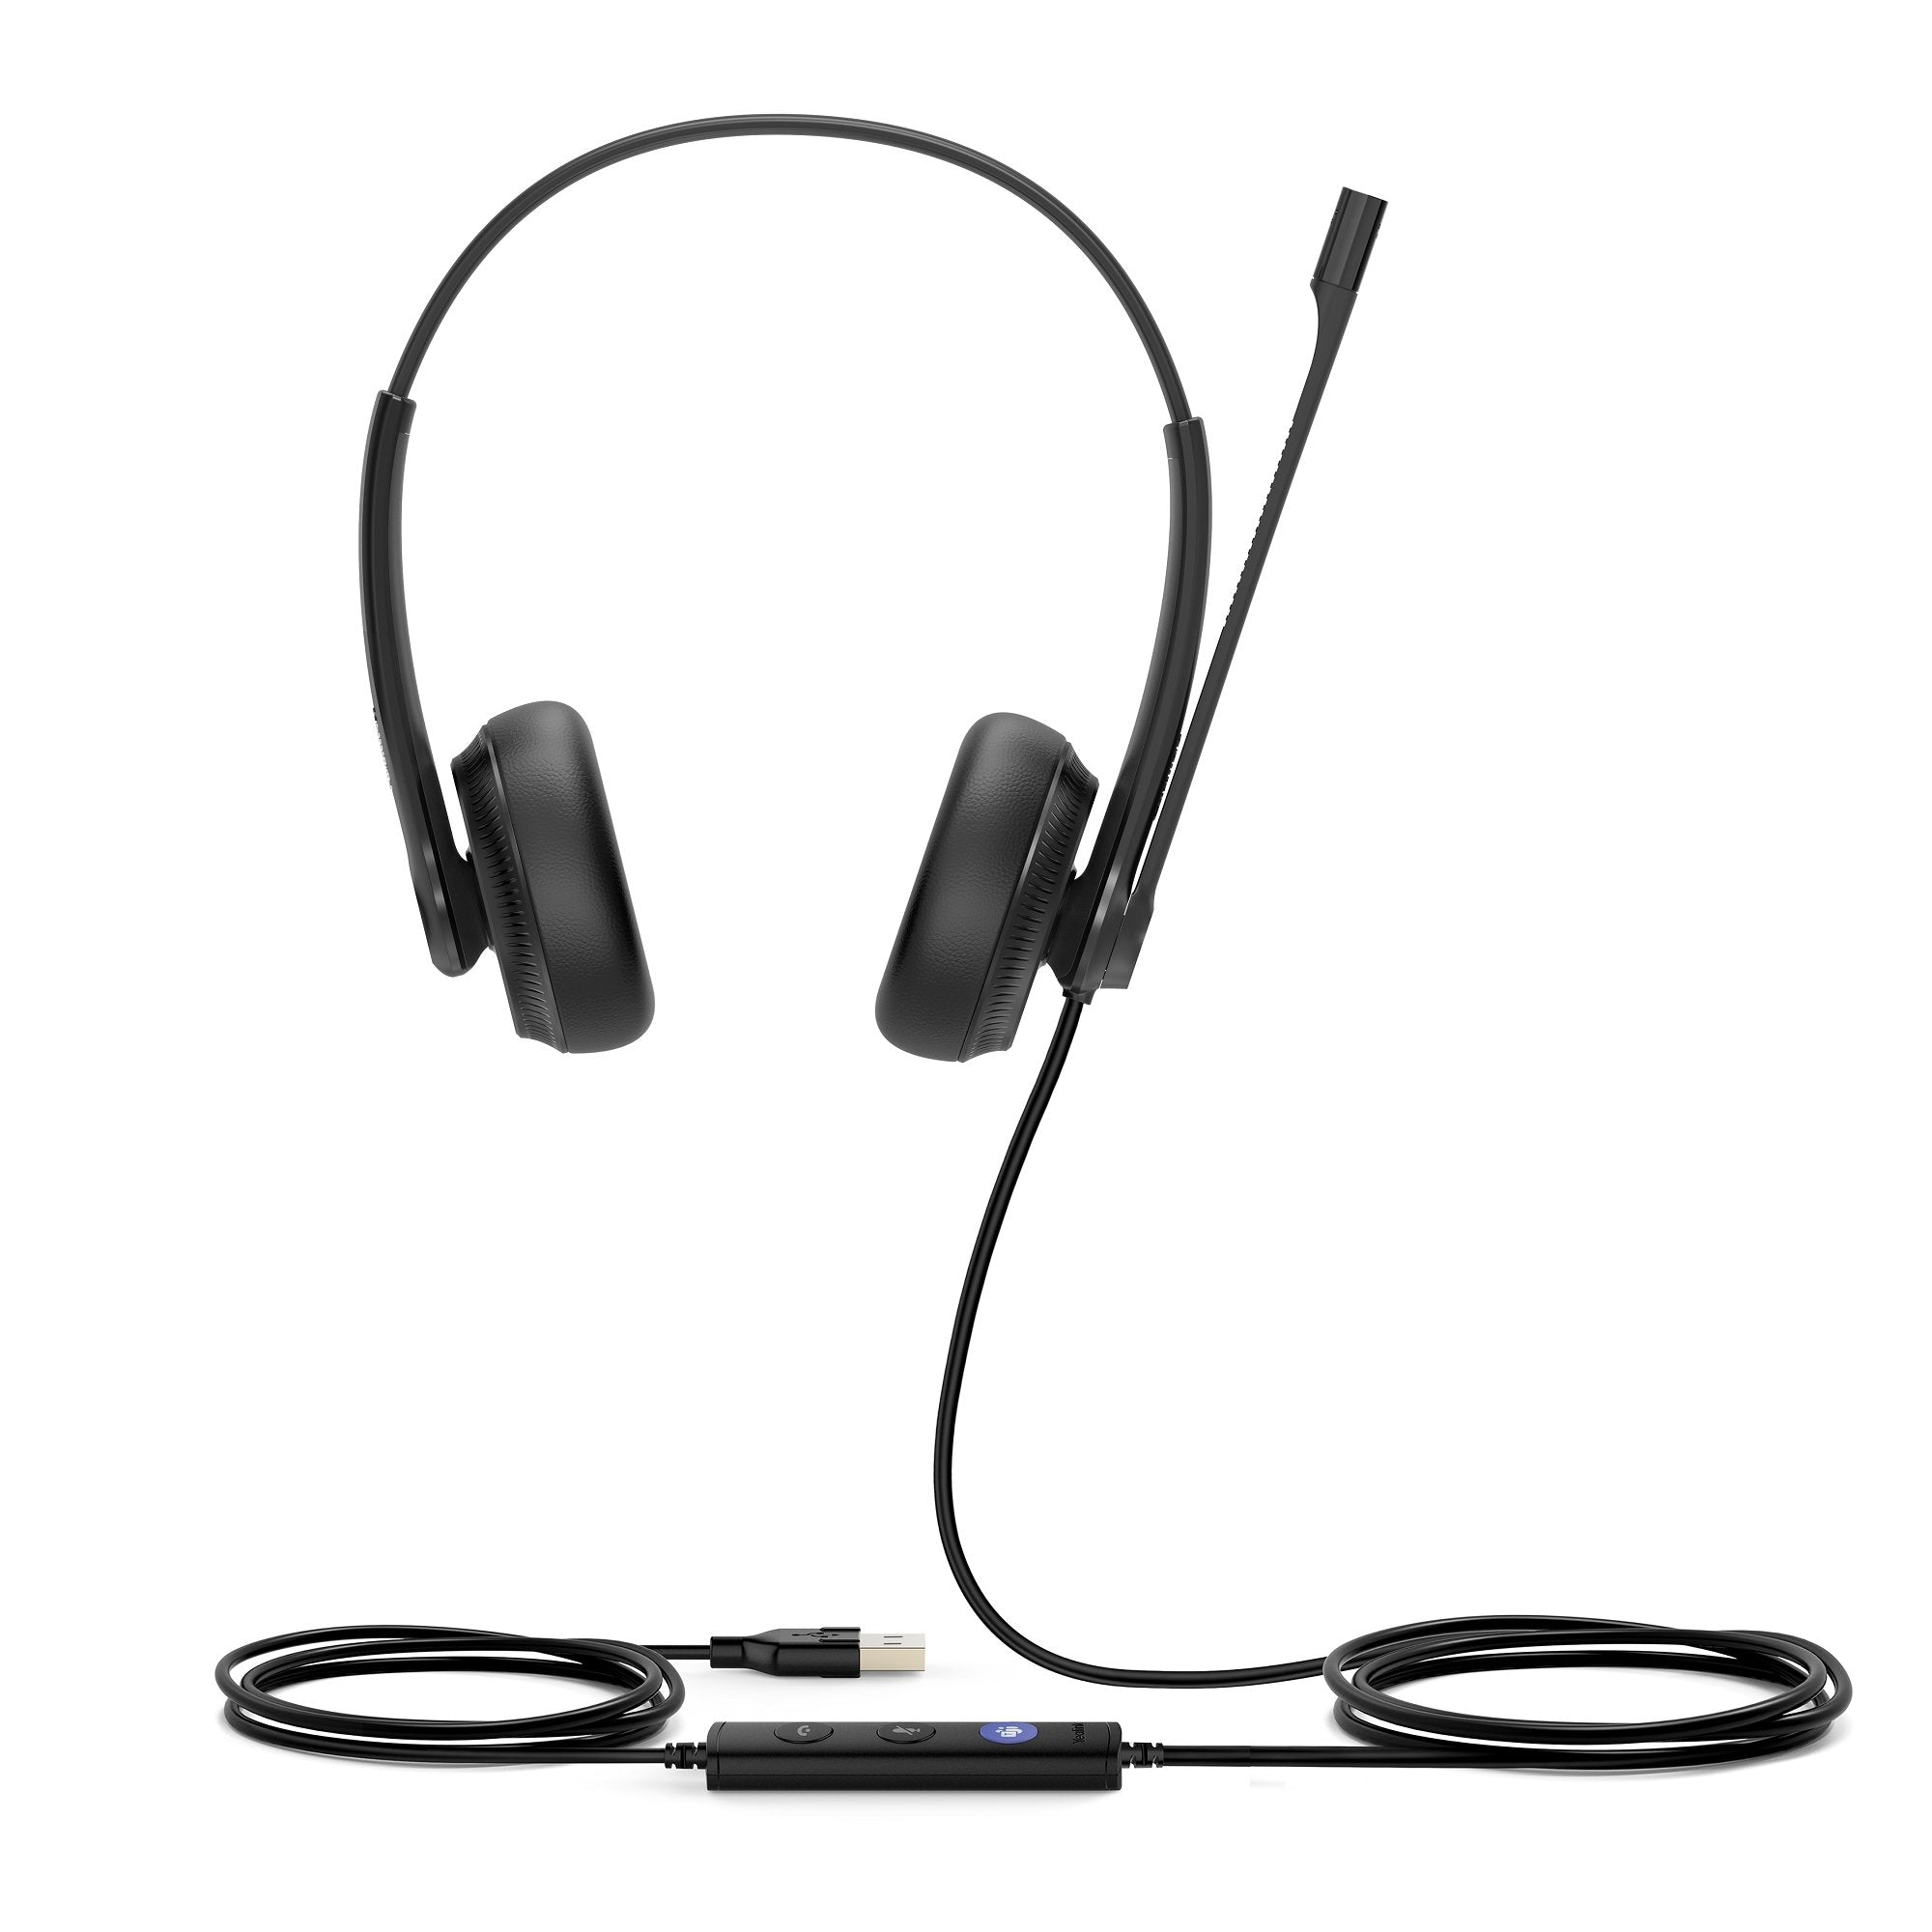 Yealink UH34 Dual USB Wired Headset for Computers - Headset Advisor